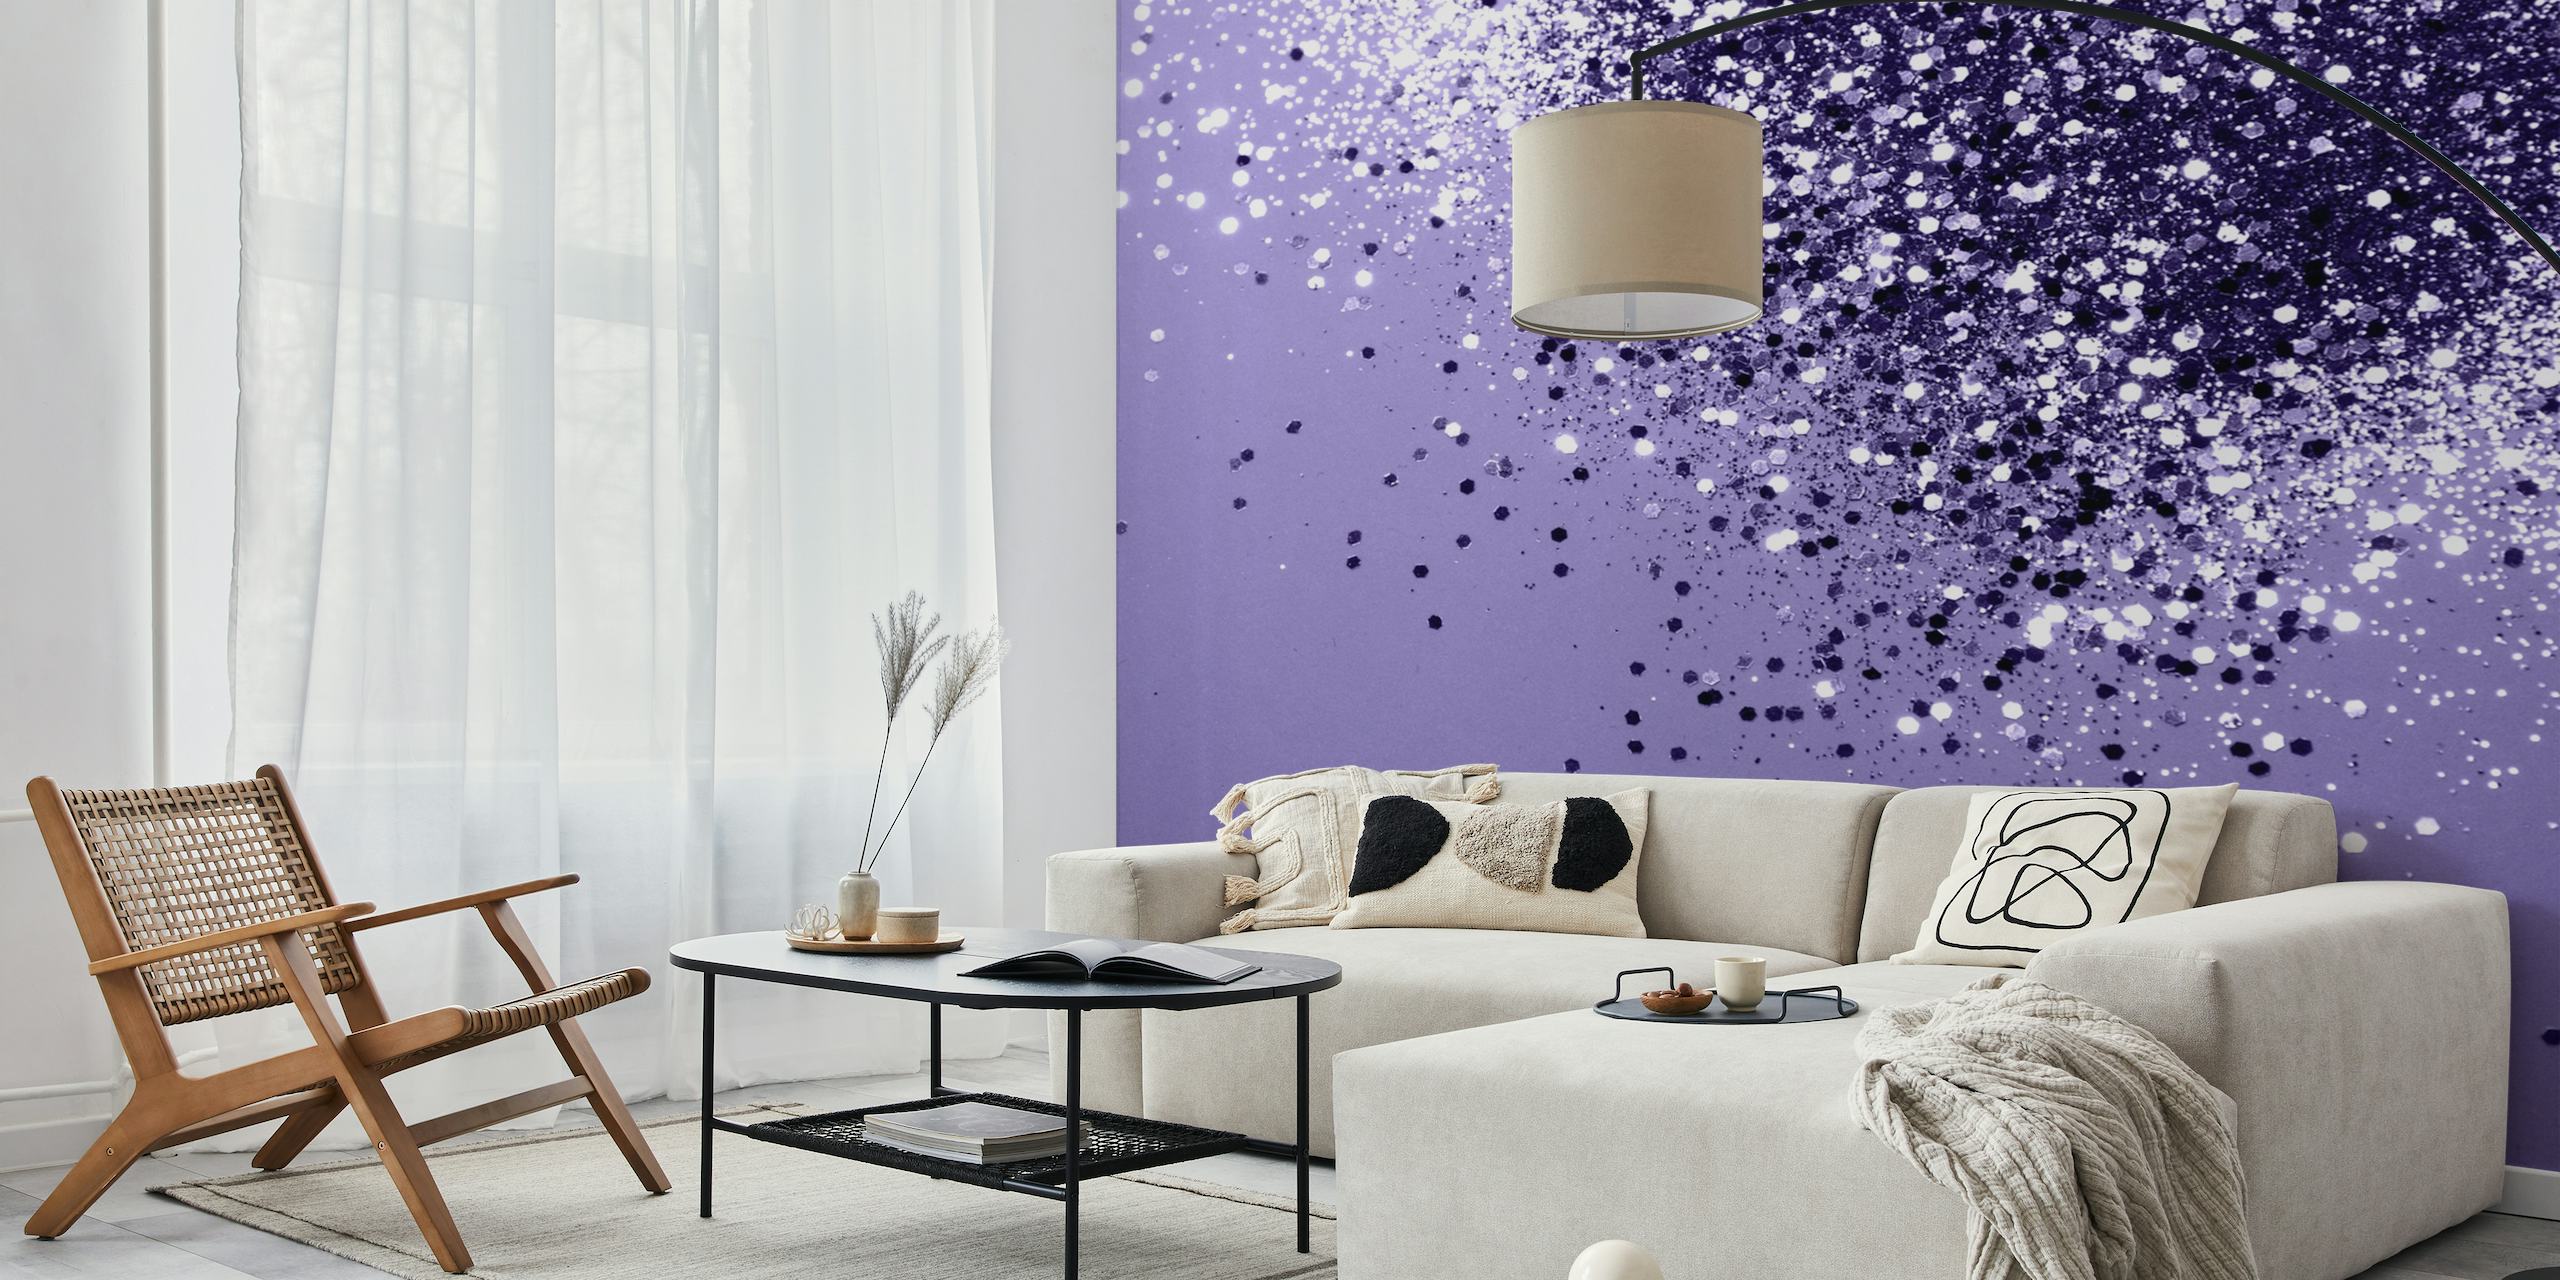 Ultra Violet Glitter Dream 1 wall mural with sparkling glitter on a purple background